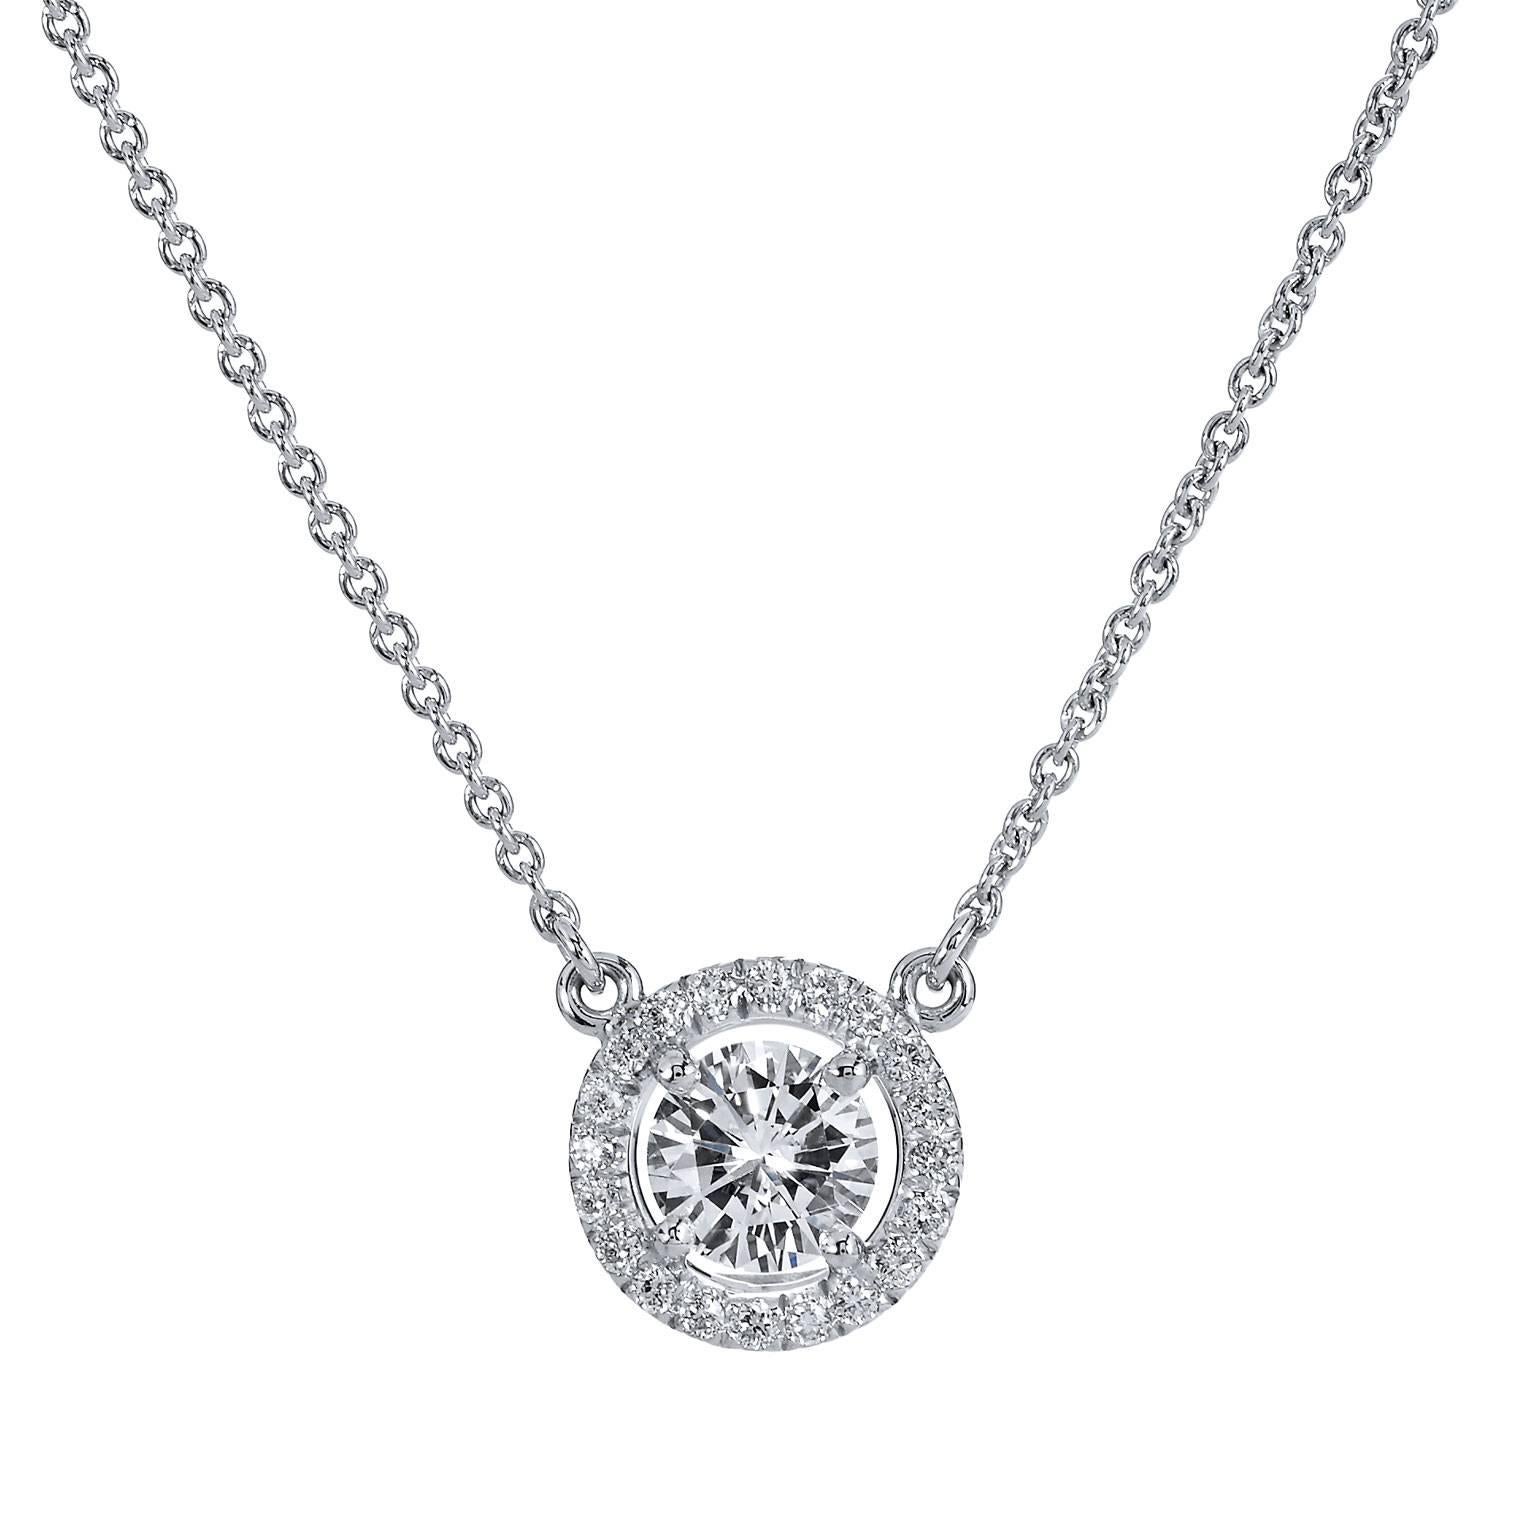 This H and H 18 karat white gold pendant necklace features 0.52 carat of round brilliant cut diamond bezel set and pave set at center (E/WS2; GIA#13217115). Simplicity and refinement reign supreme in this piece.